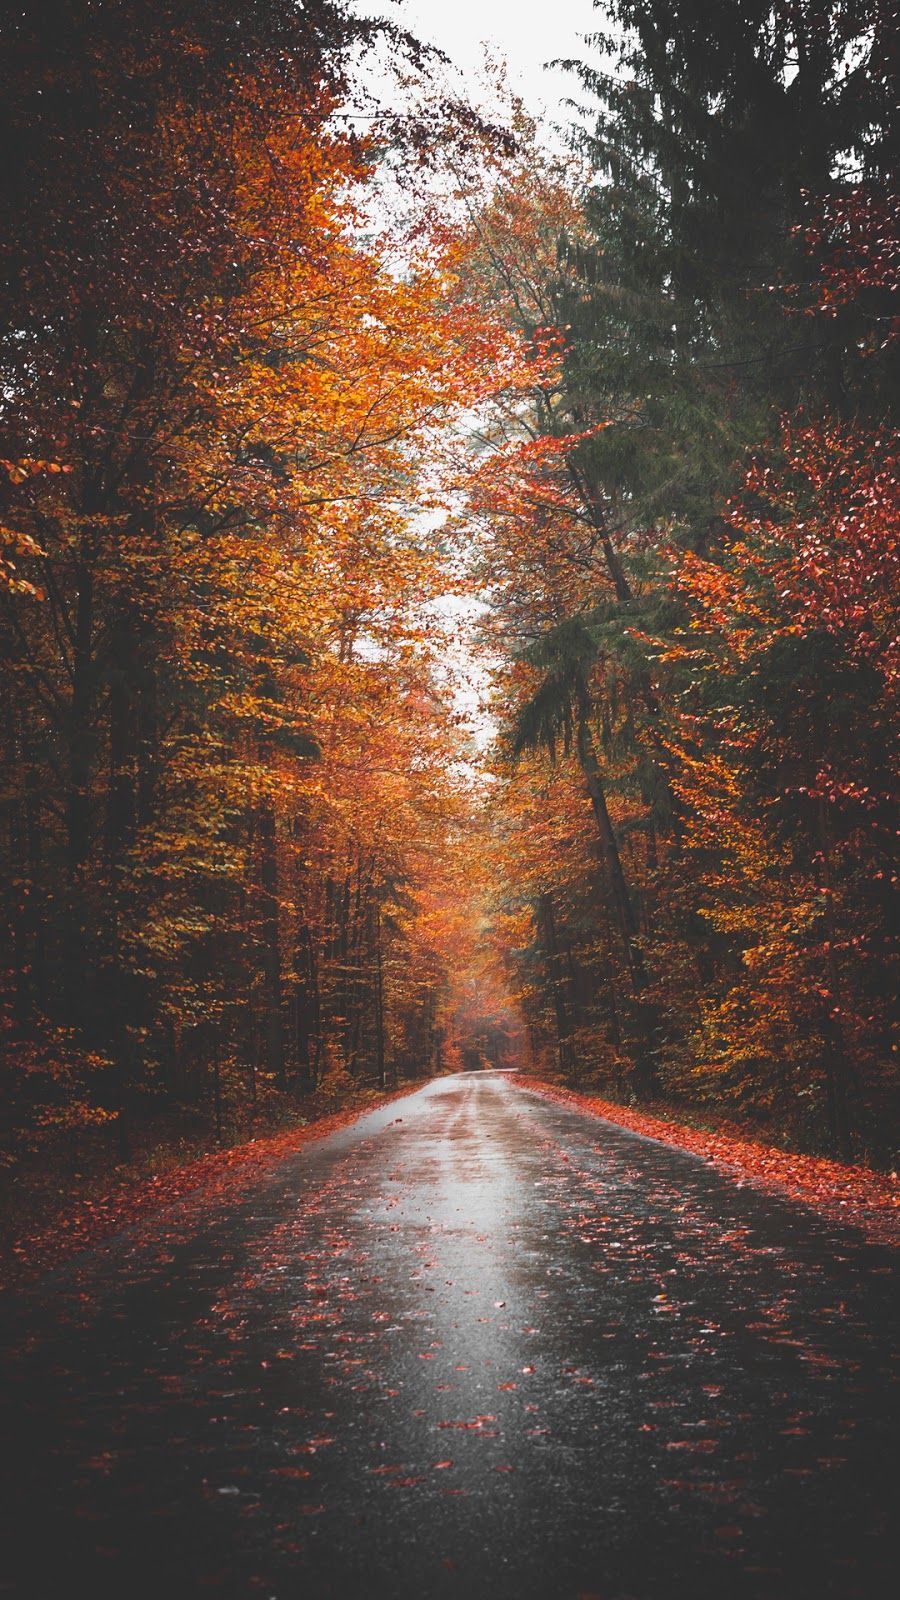 Autumn road #wallpaper #iphone #android. iPhone wallpaper photography, Photography wallpaper, Nature photography